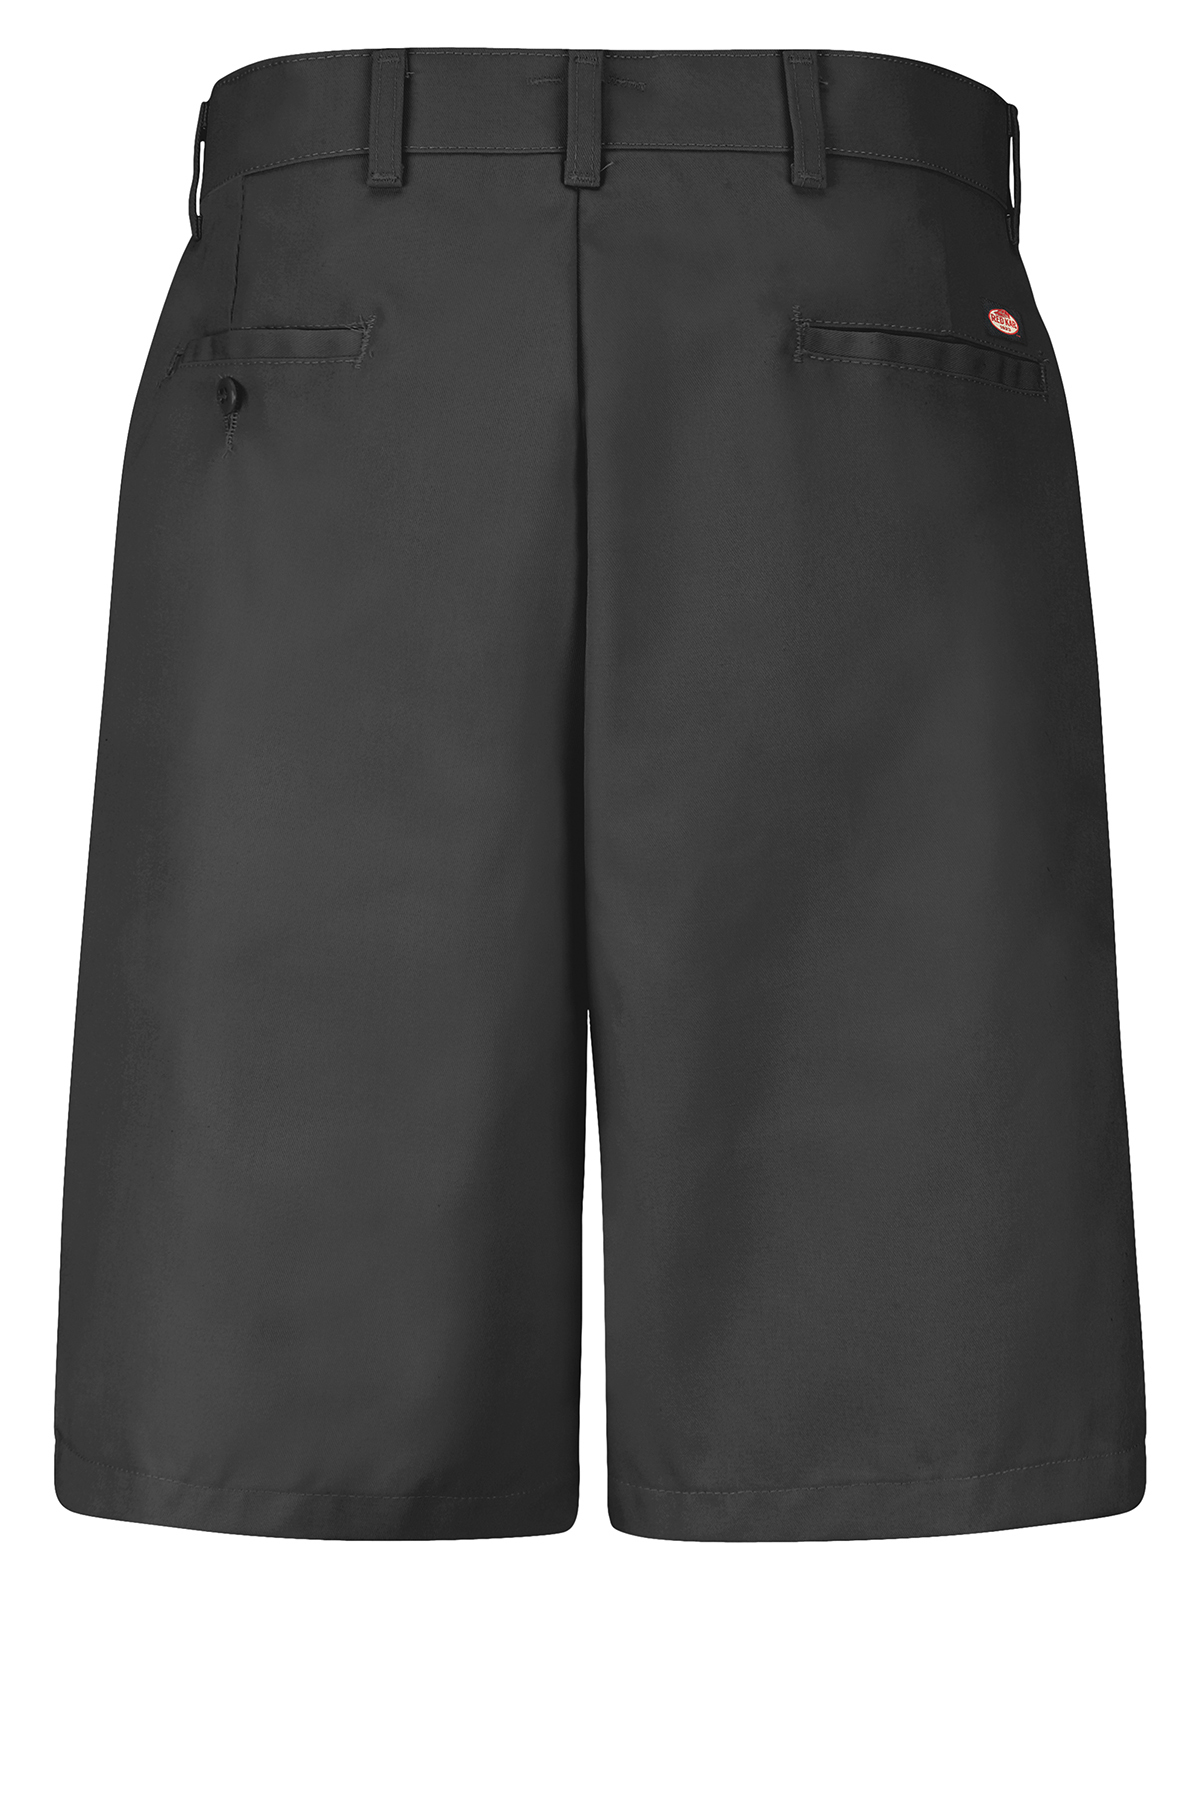 Red Kap Industrial Work Short | Product | Company Casuals